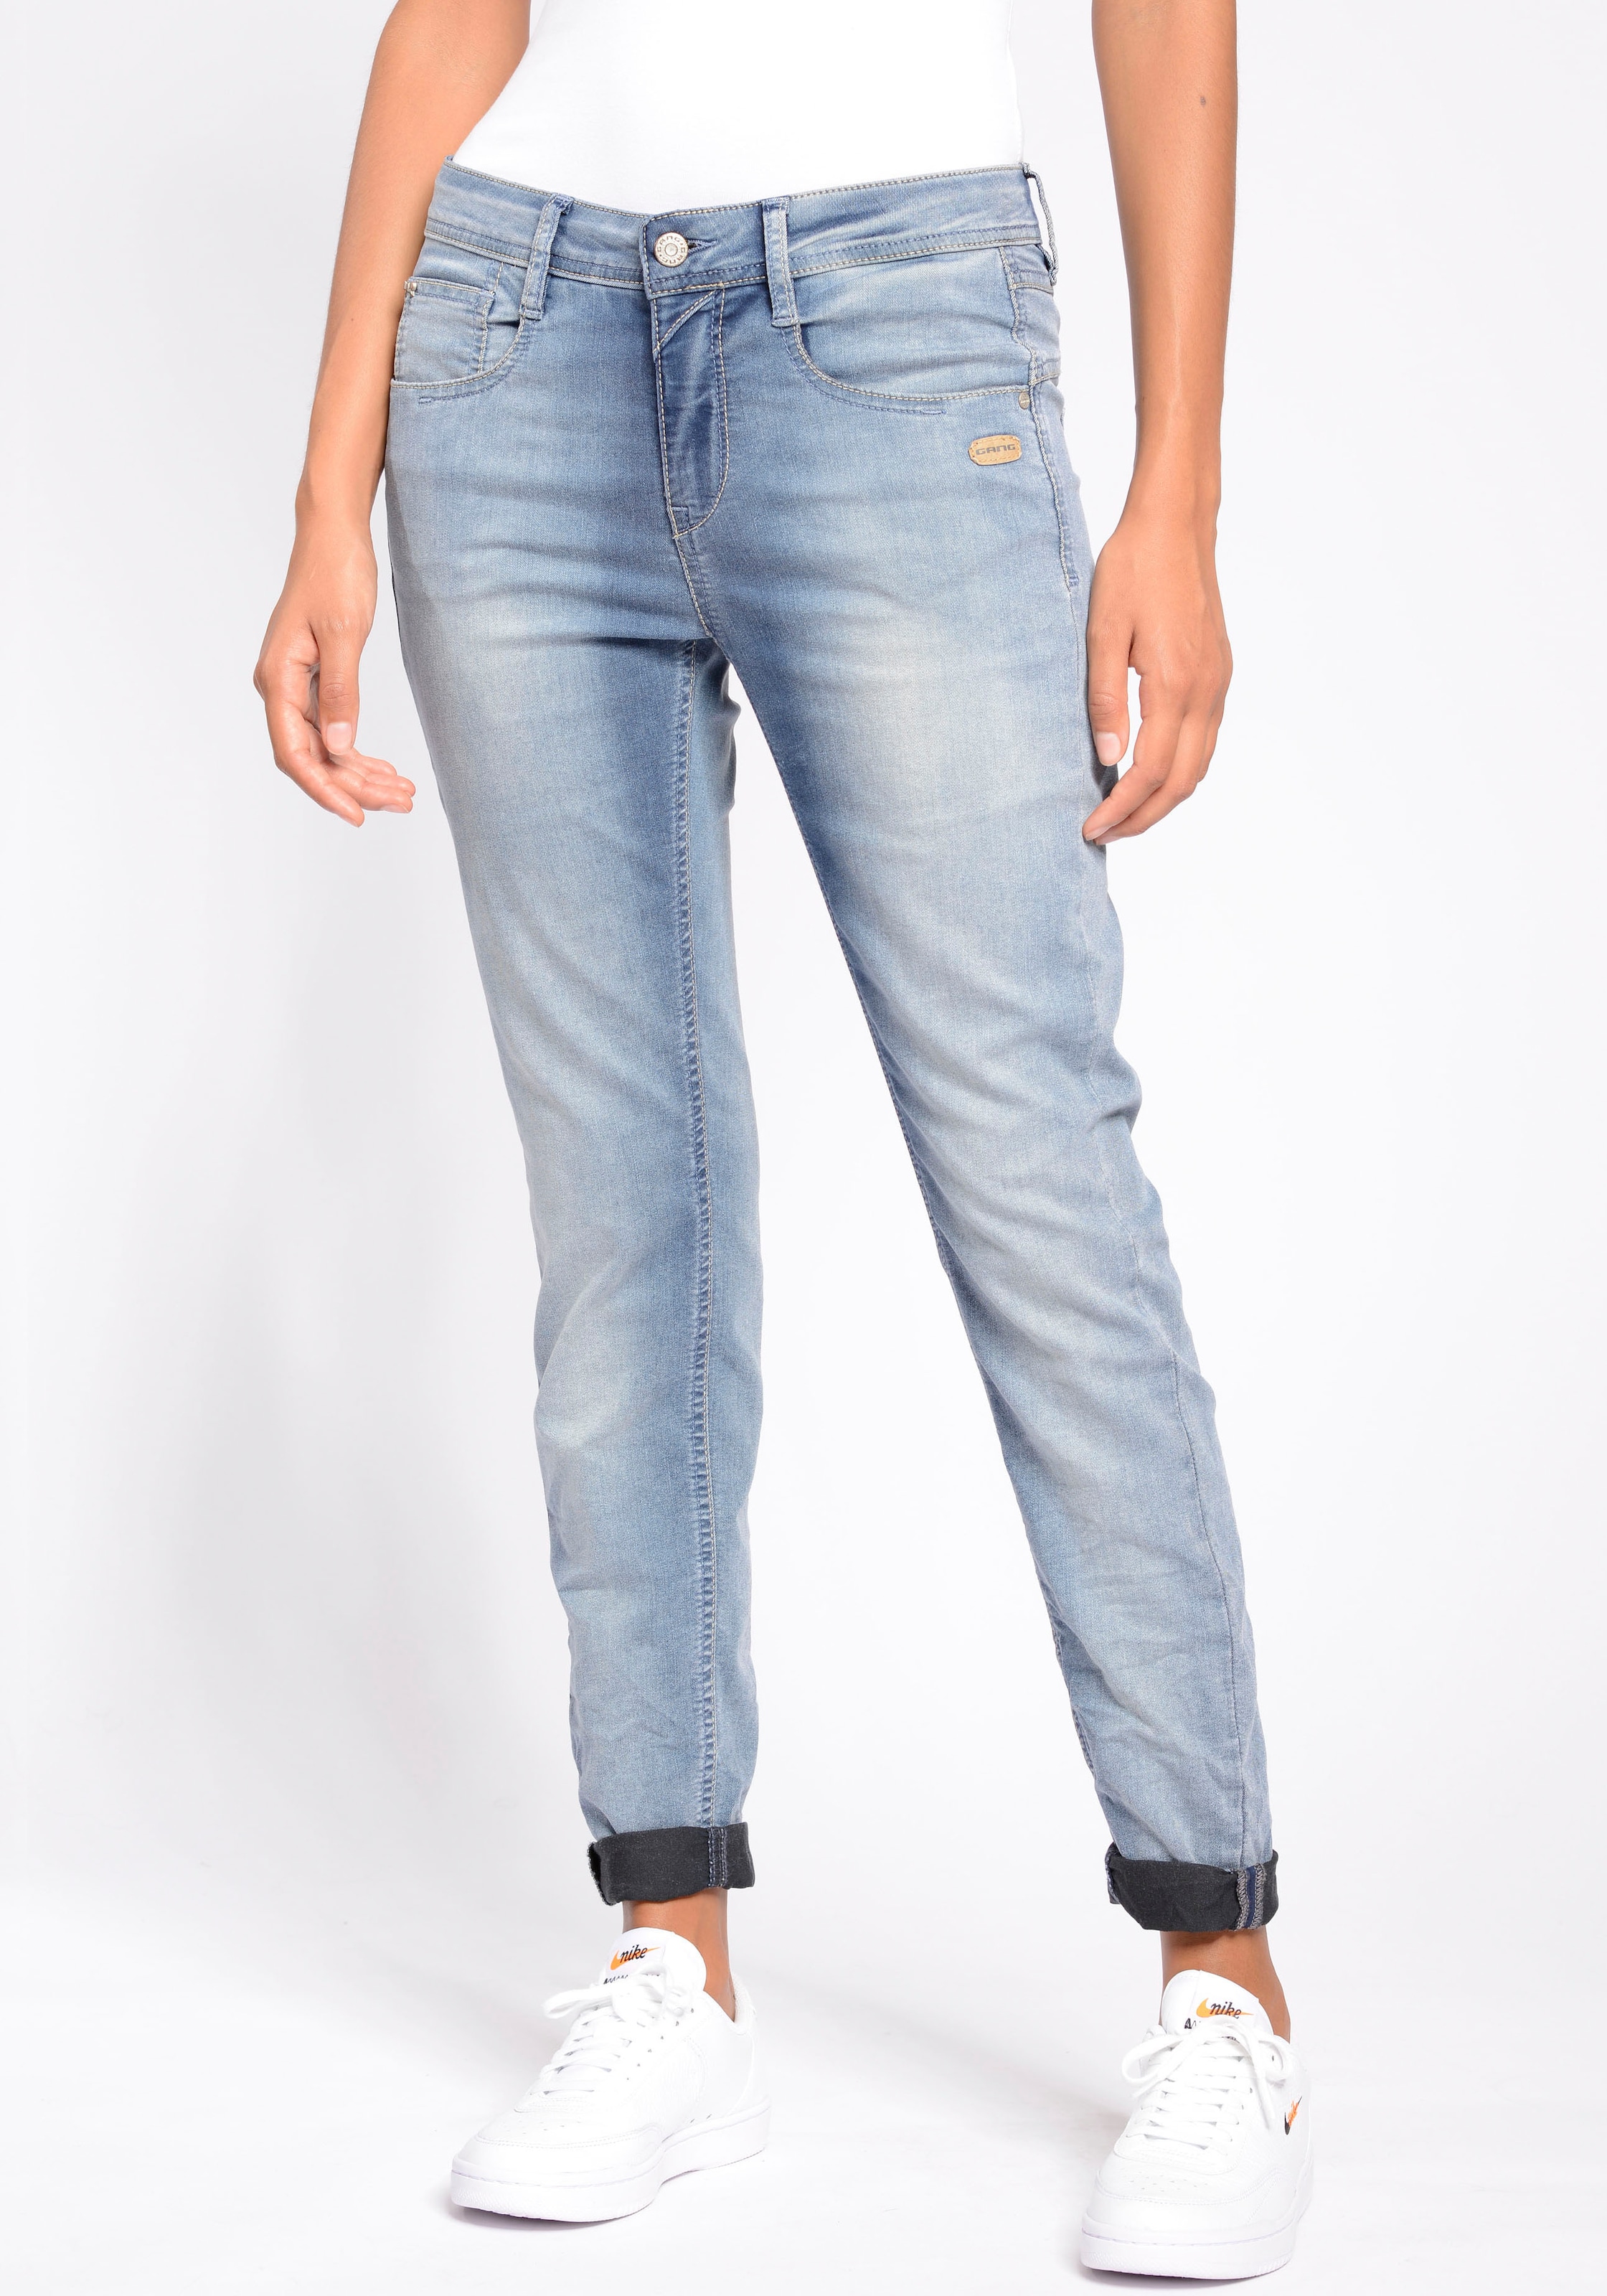 GANG Relax-fit-Jeans Waschung online cooler bei Used »94Amelie«, OTTO in